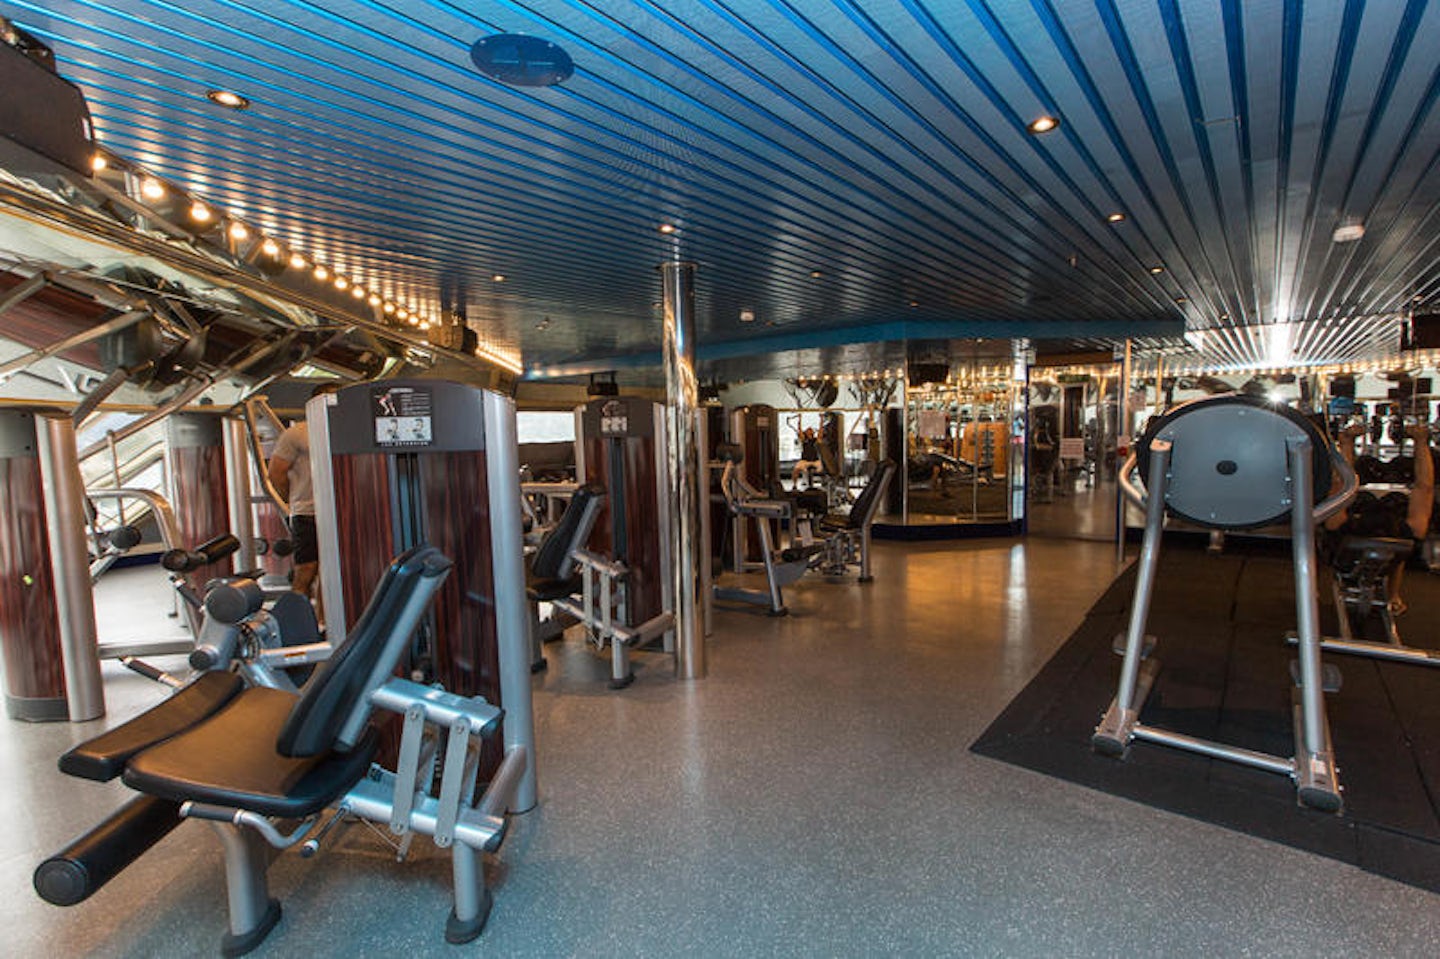 Fitness Center on Carnival Freedom